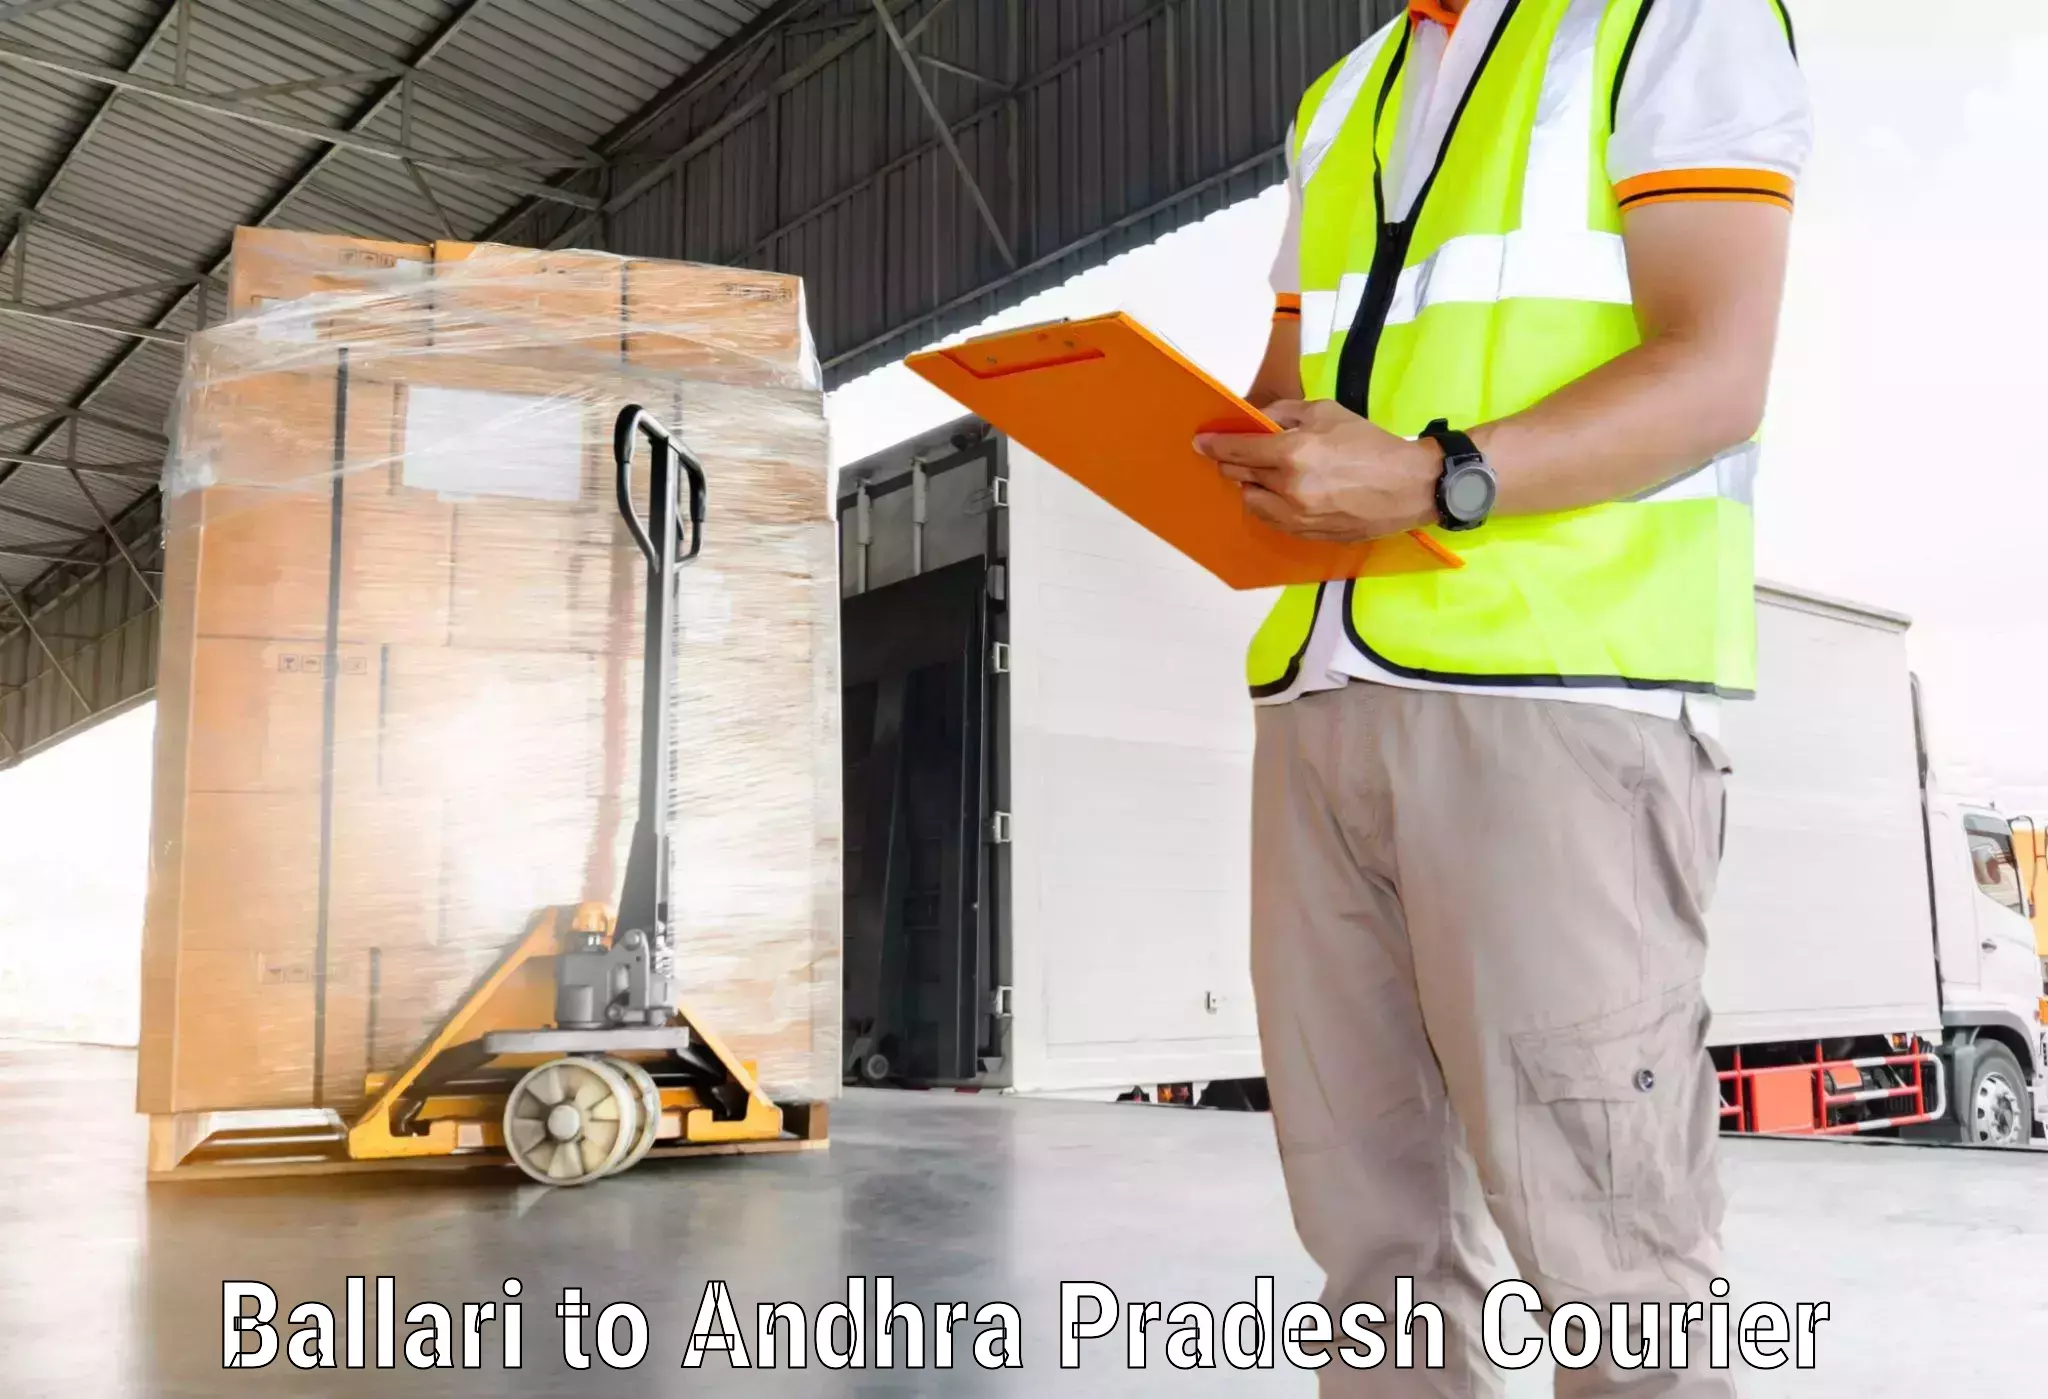 State-of-the-art courier technology Ballari to Kathipudi